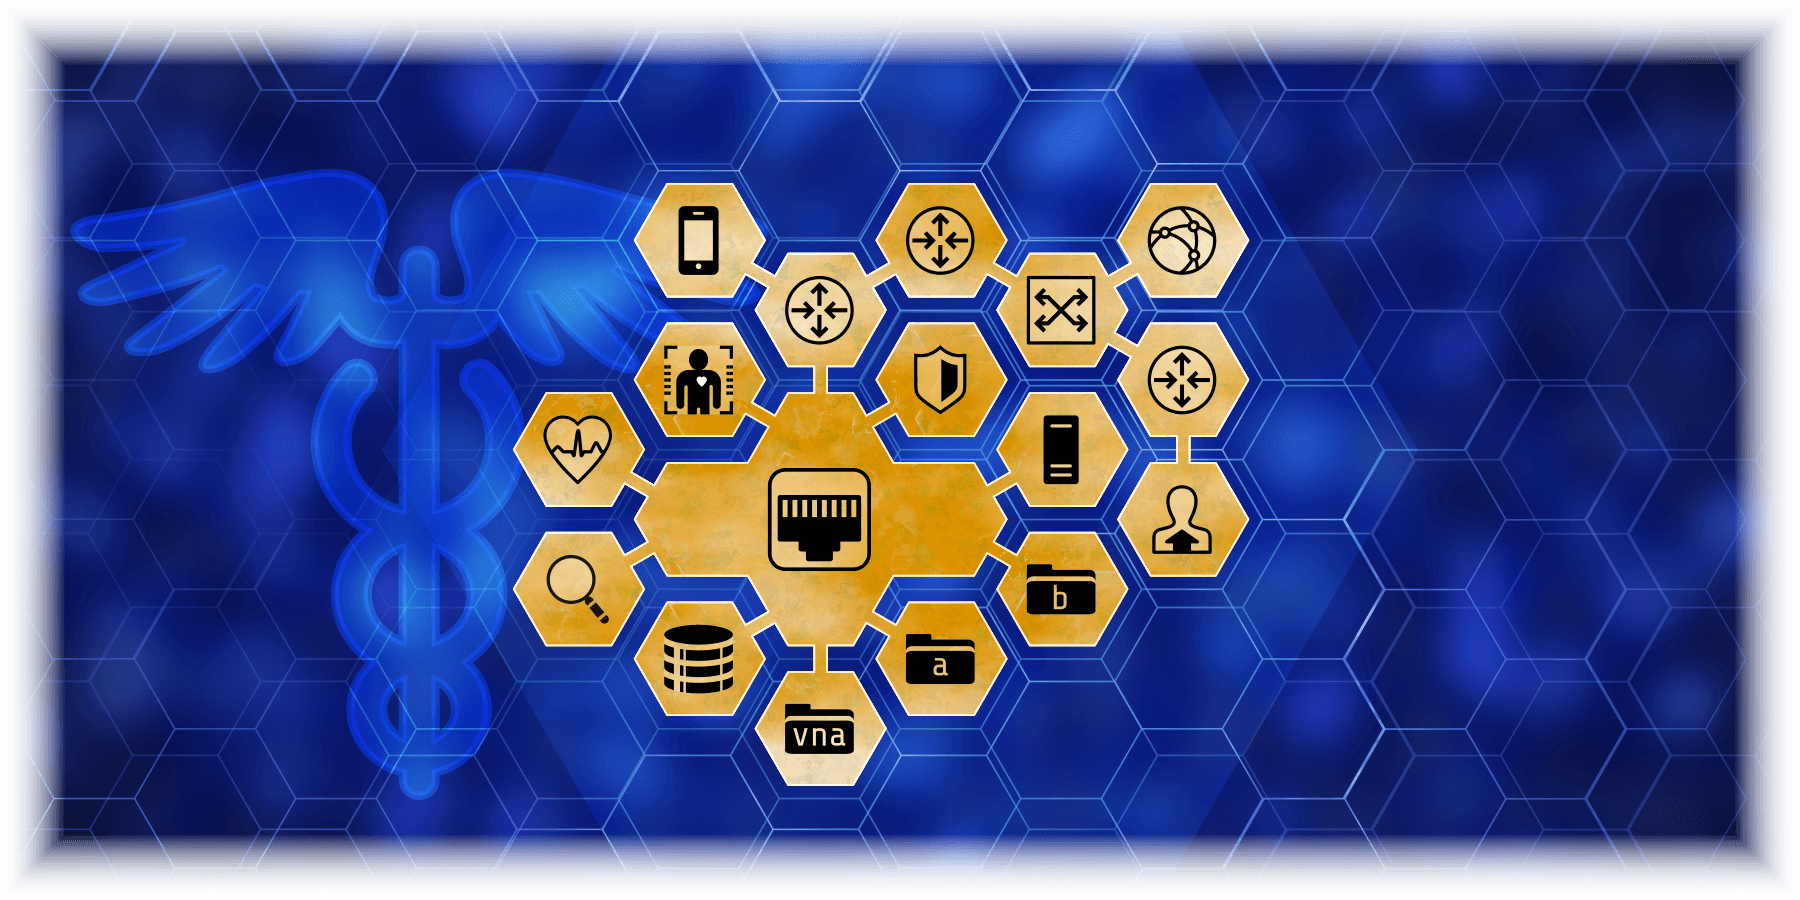 Hexagonal icons depicting trusted and non-trusted network components.